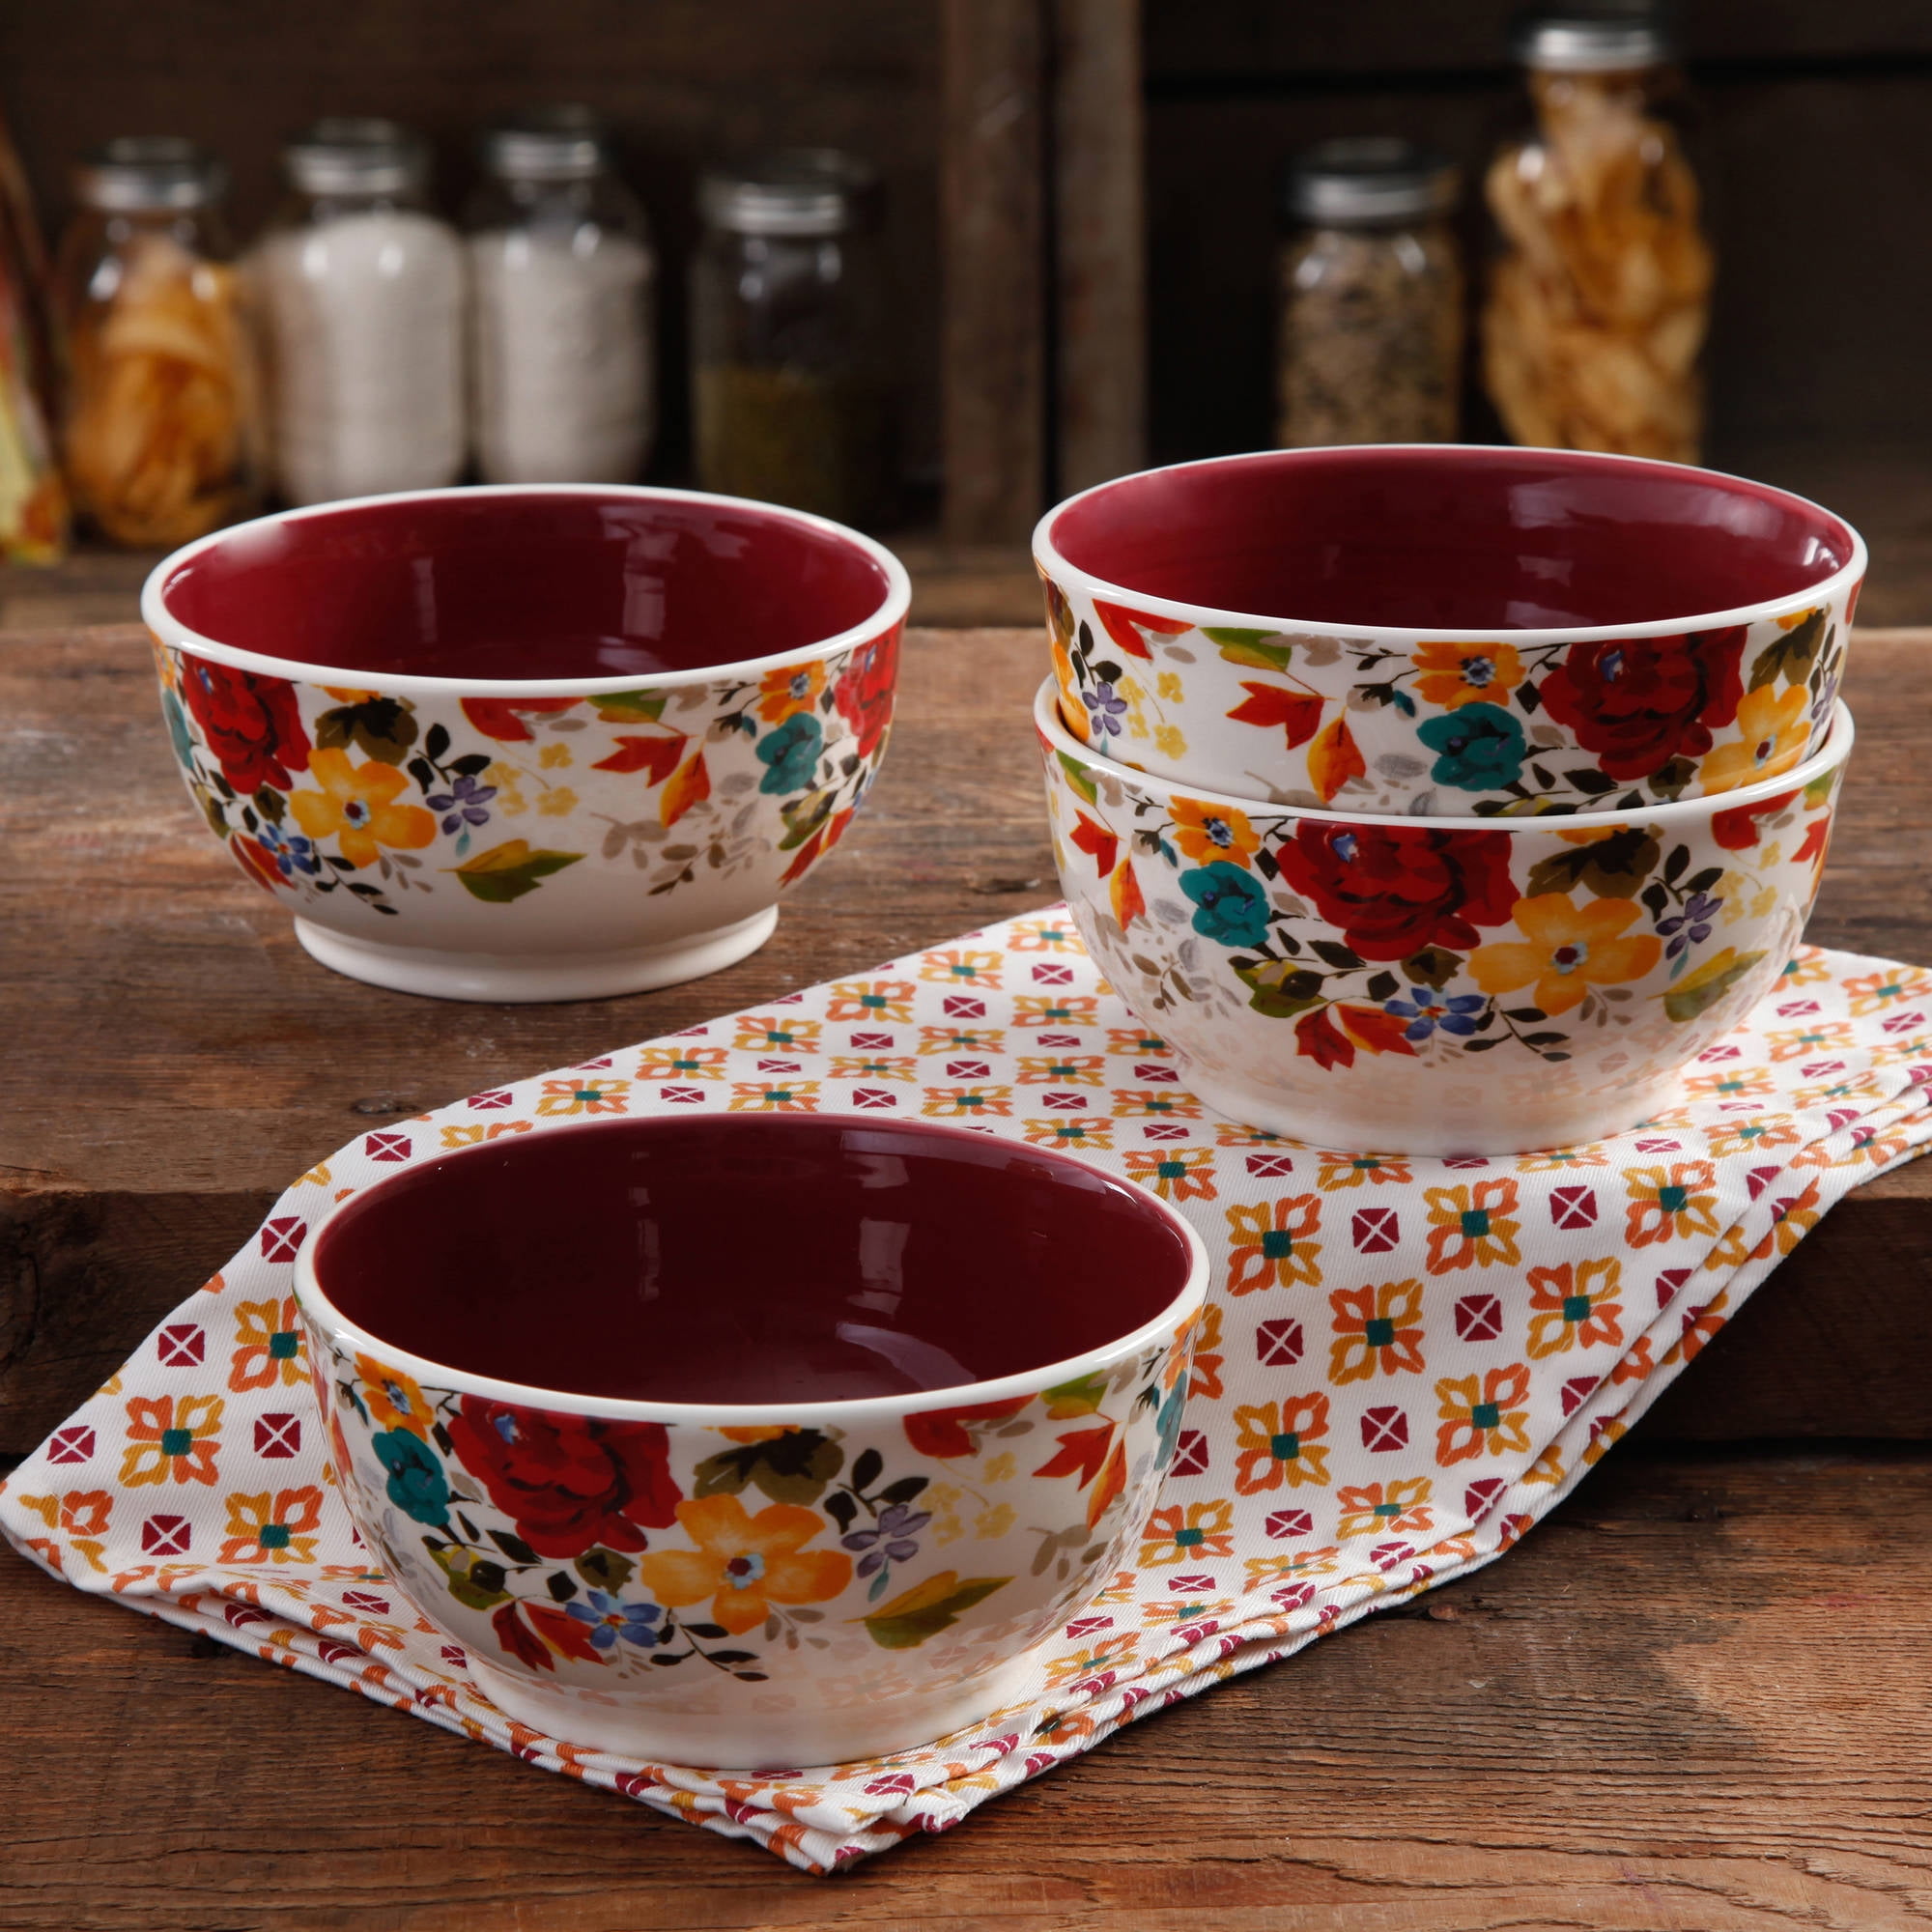 New! Pioneer Woman 6” Timeless Floral Latte Bowls - Set Of 4